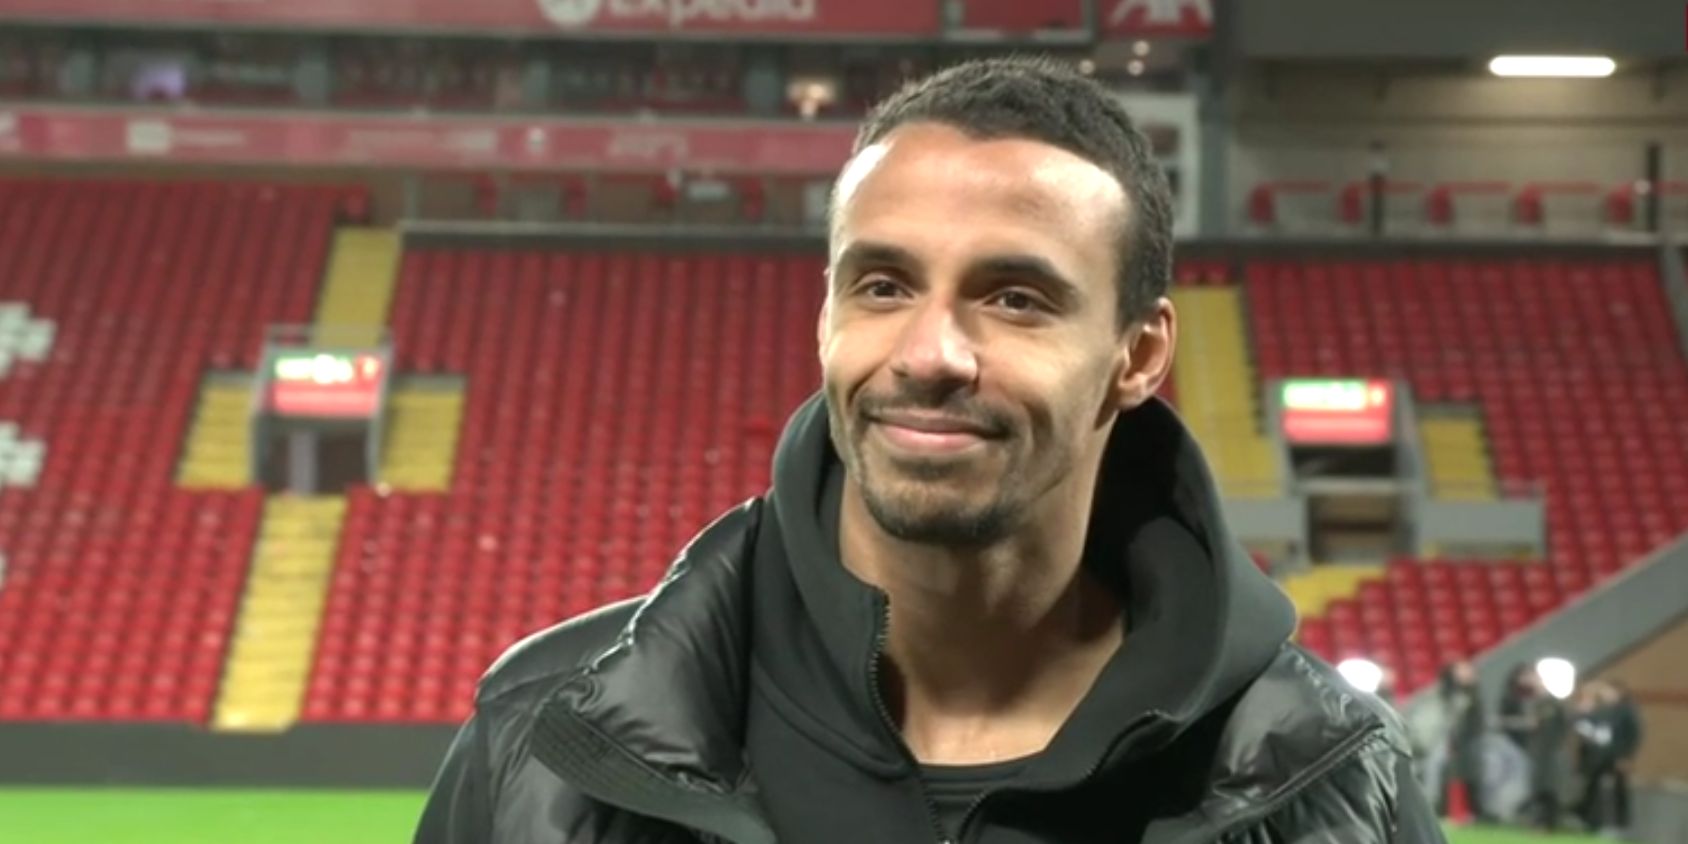 (Video) “The ball finally goes in!” – Joel Matip on scoring for Liverpool and his injury-free run of form